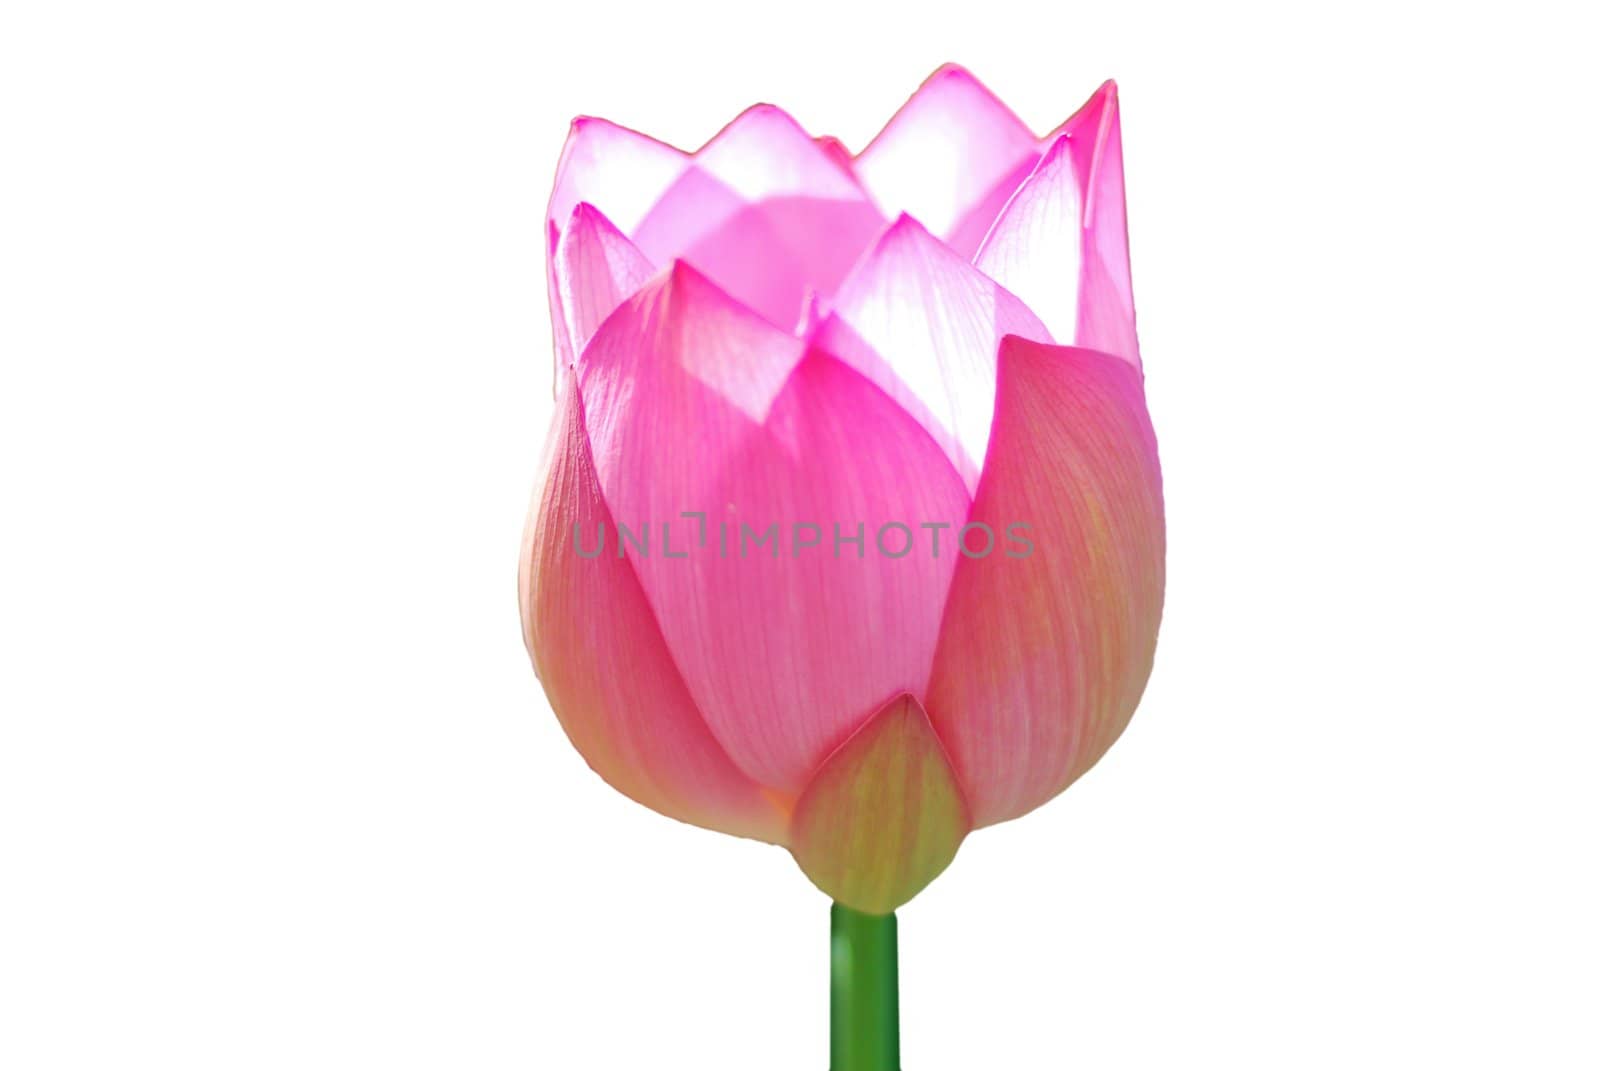 Lotus flower isolated on a white background Photo taken on: June, 2008